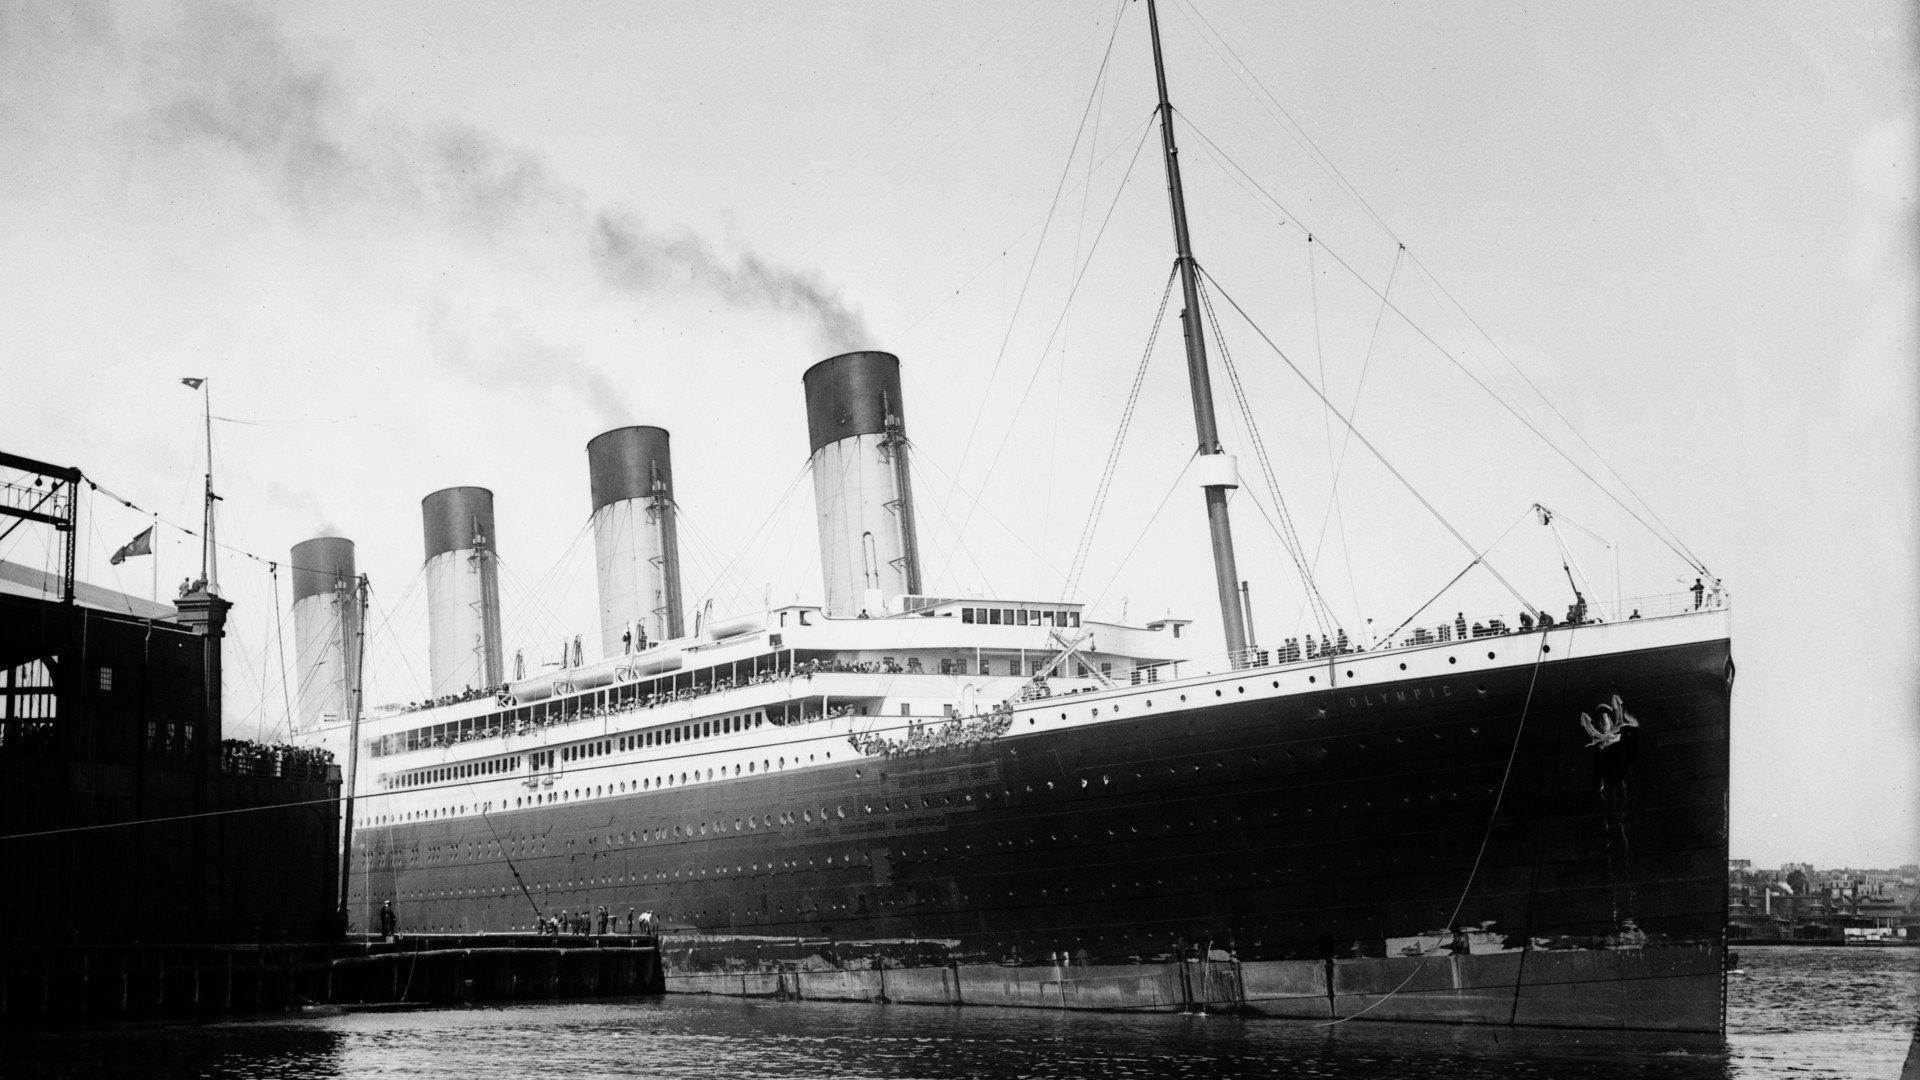 Rms Olympic Wallpapers Wallpaper Cave Images, Photos, Reviews